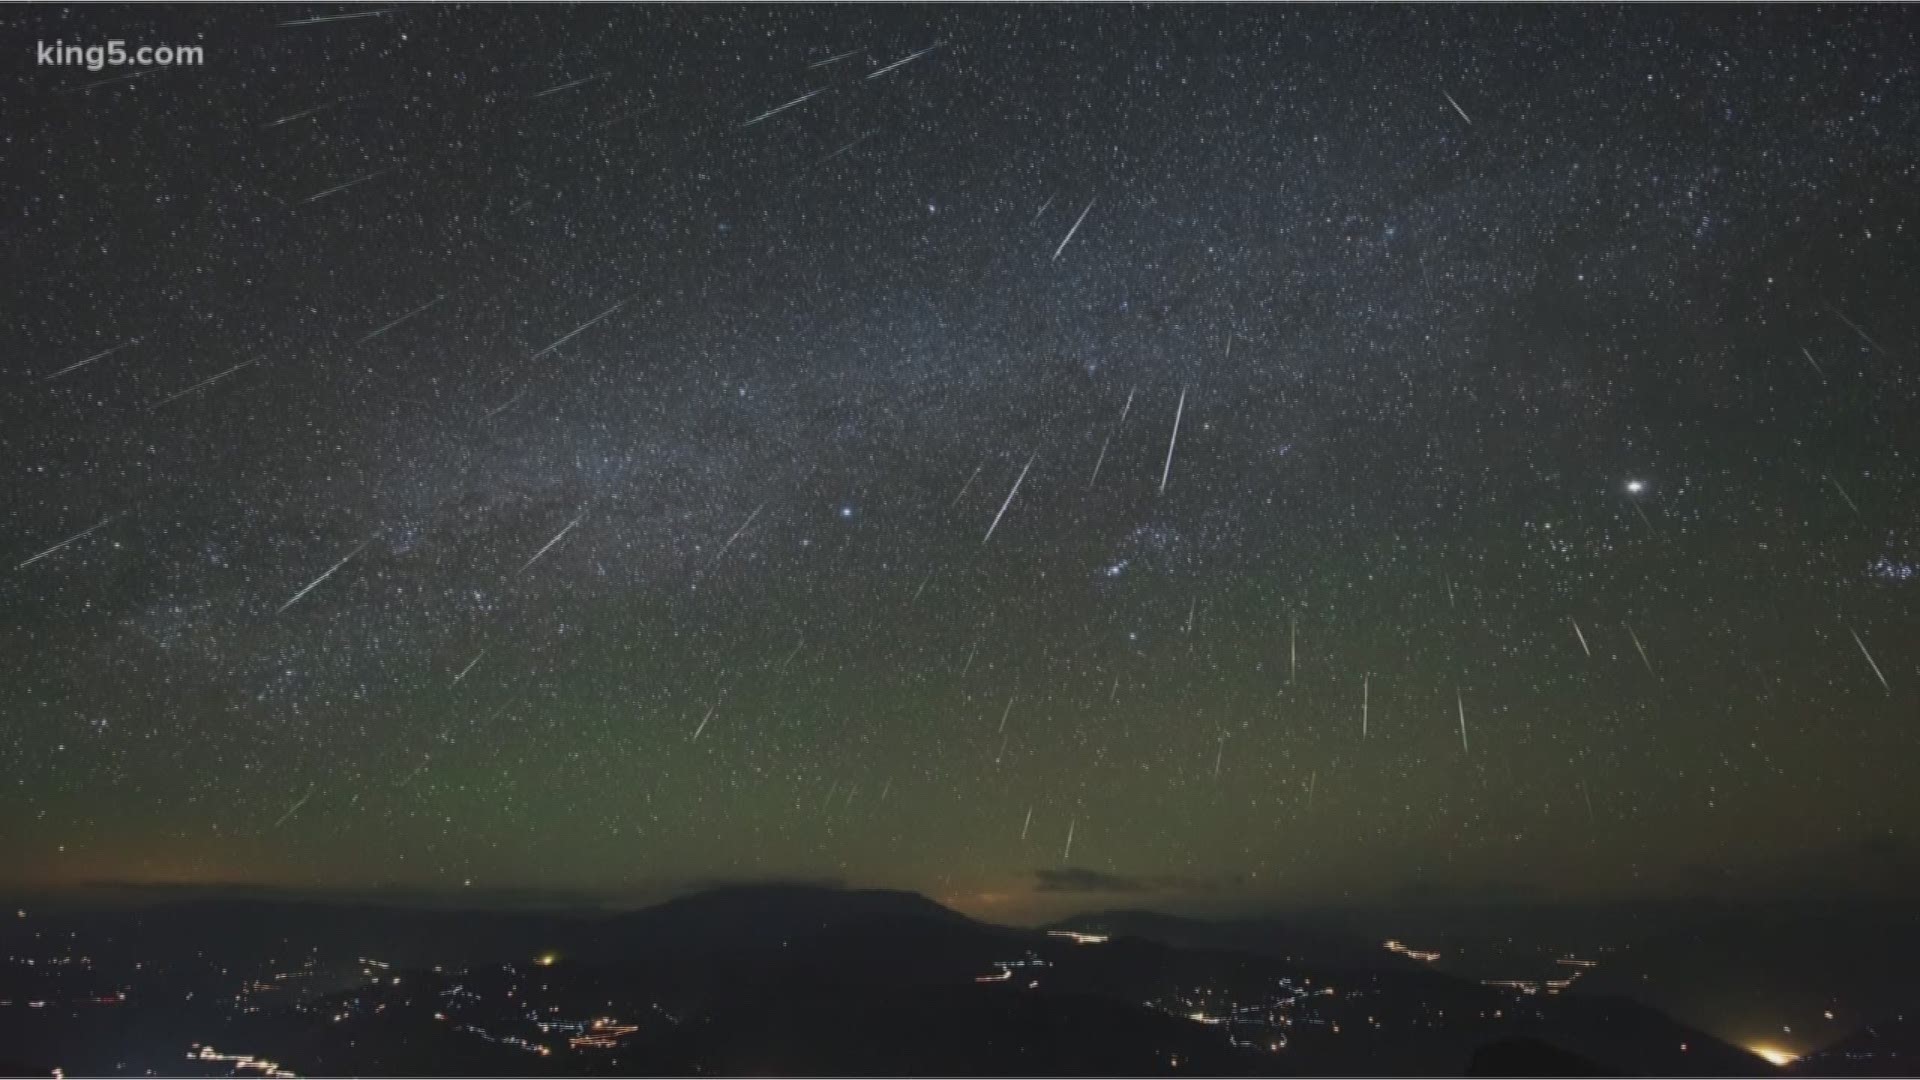 States on the East Coast and Midwest will likely see the meteor shower.